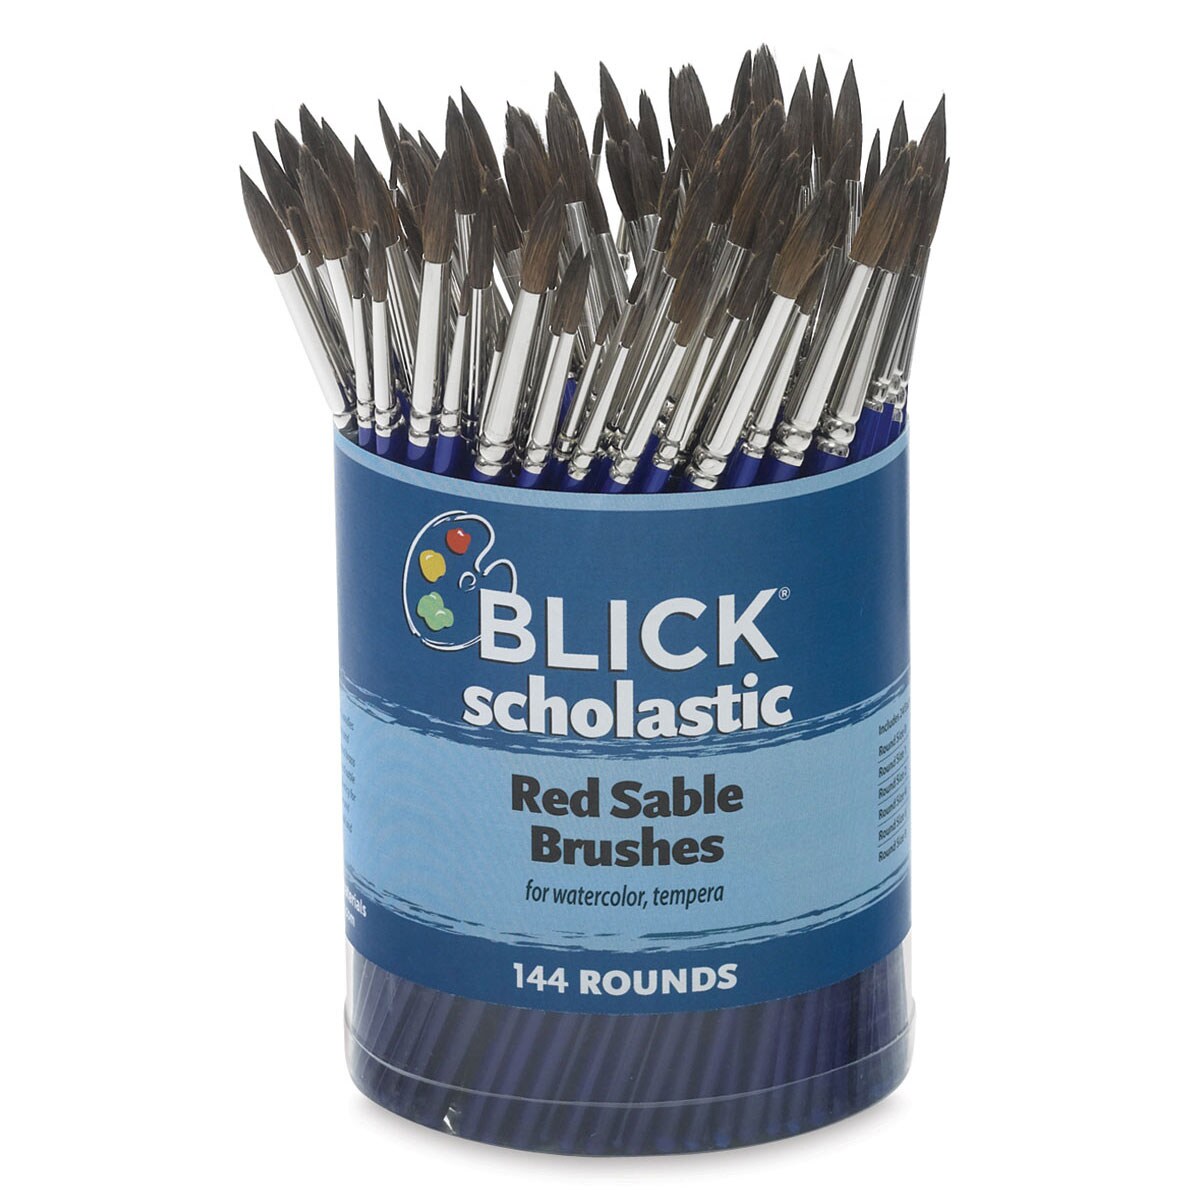 Blick Scholastic Red Sable Brush Set - Round, Set of 144